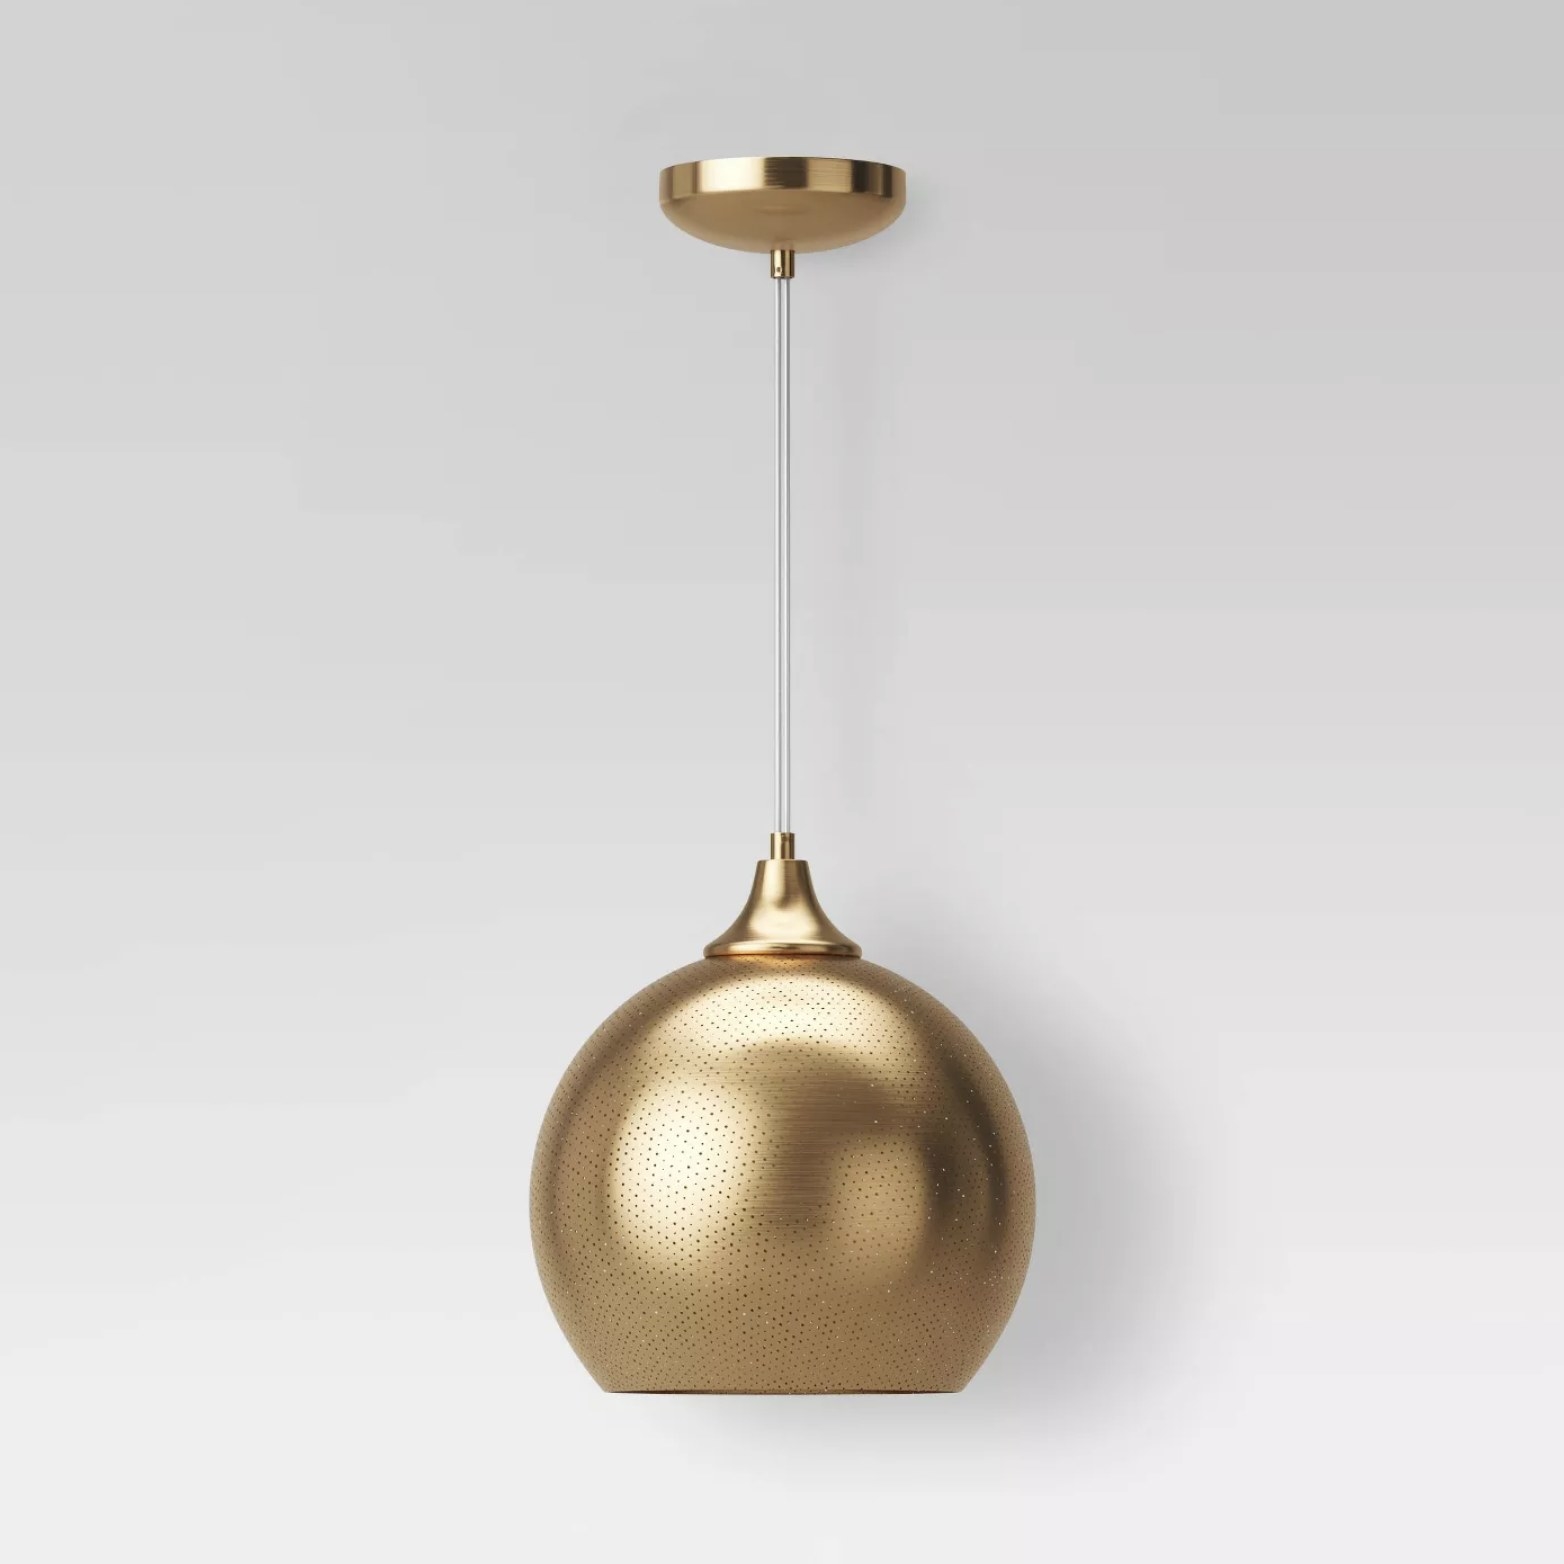 A gold domed light fixture that hangs from the ceiling 